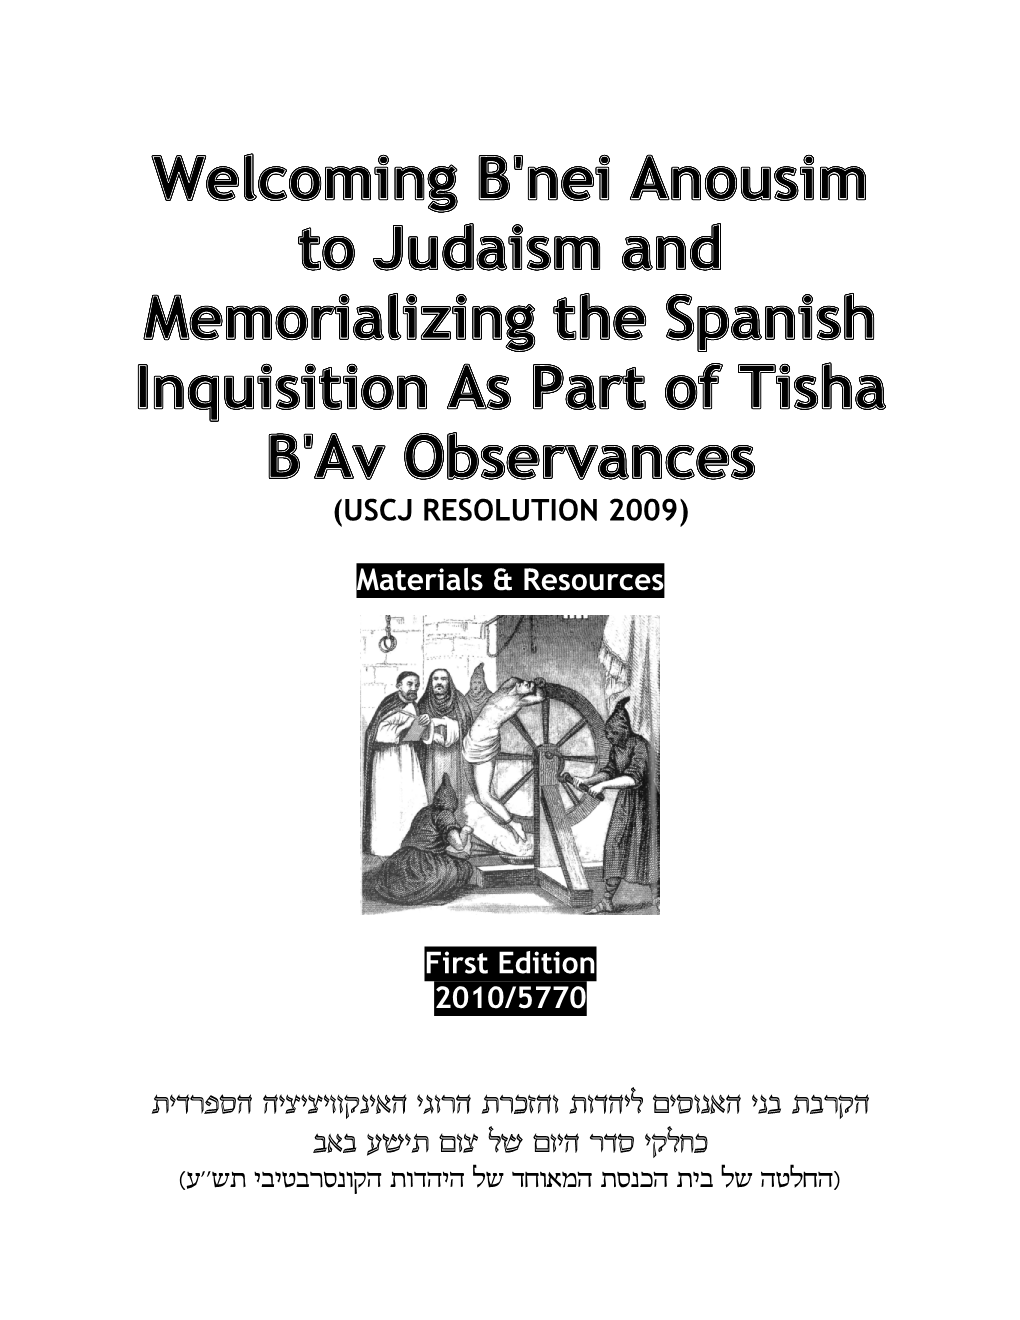 Welcoming B'nei Anousim to Judaism and Memorializing the Spanish Inquisition As Part of Tisha B'av Observances